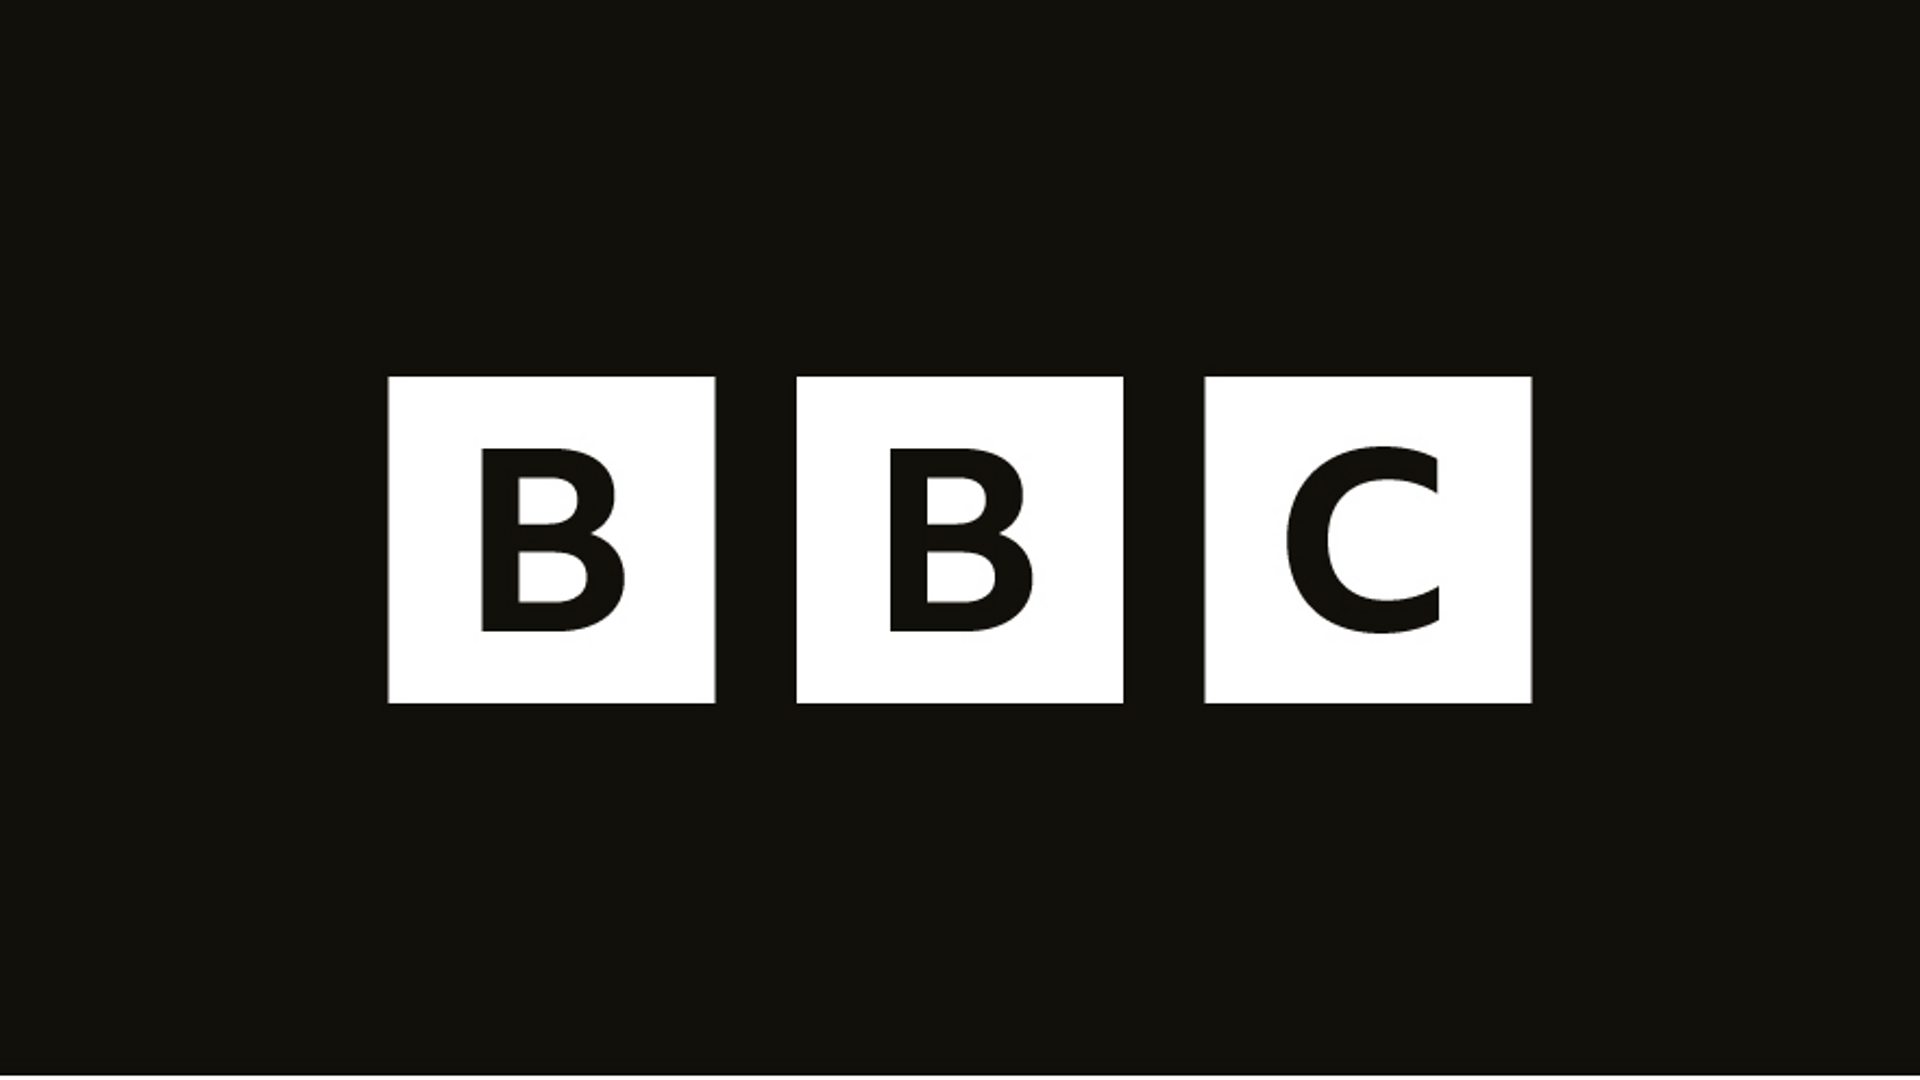 Welcome to the BBC Branding site - Branding